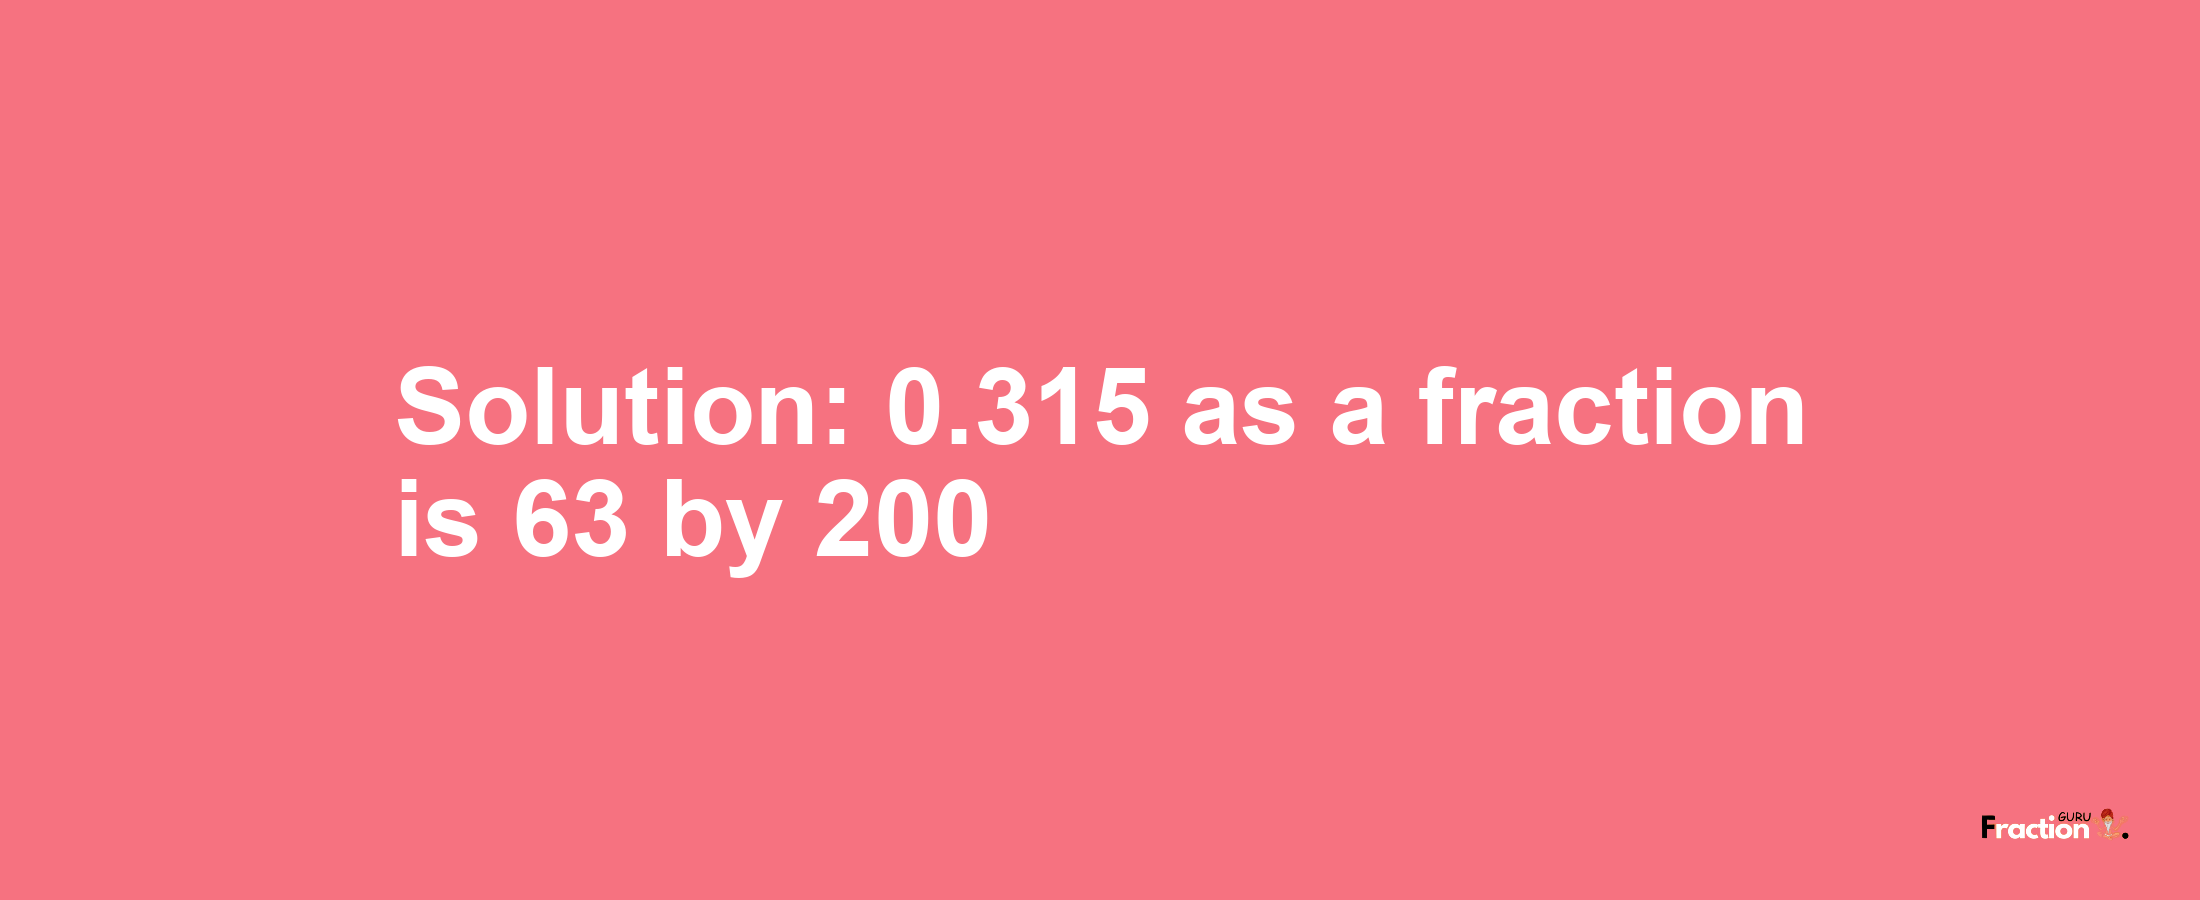 Solution:0.315 as a fraction is 63/200